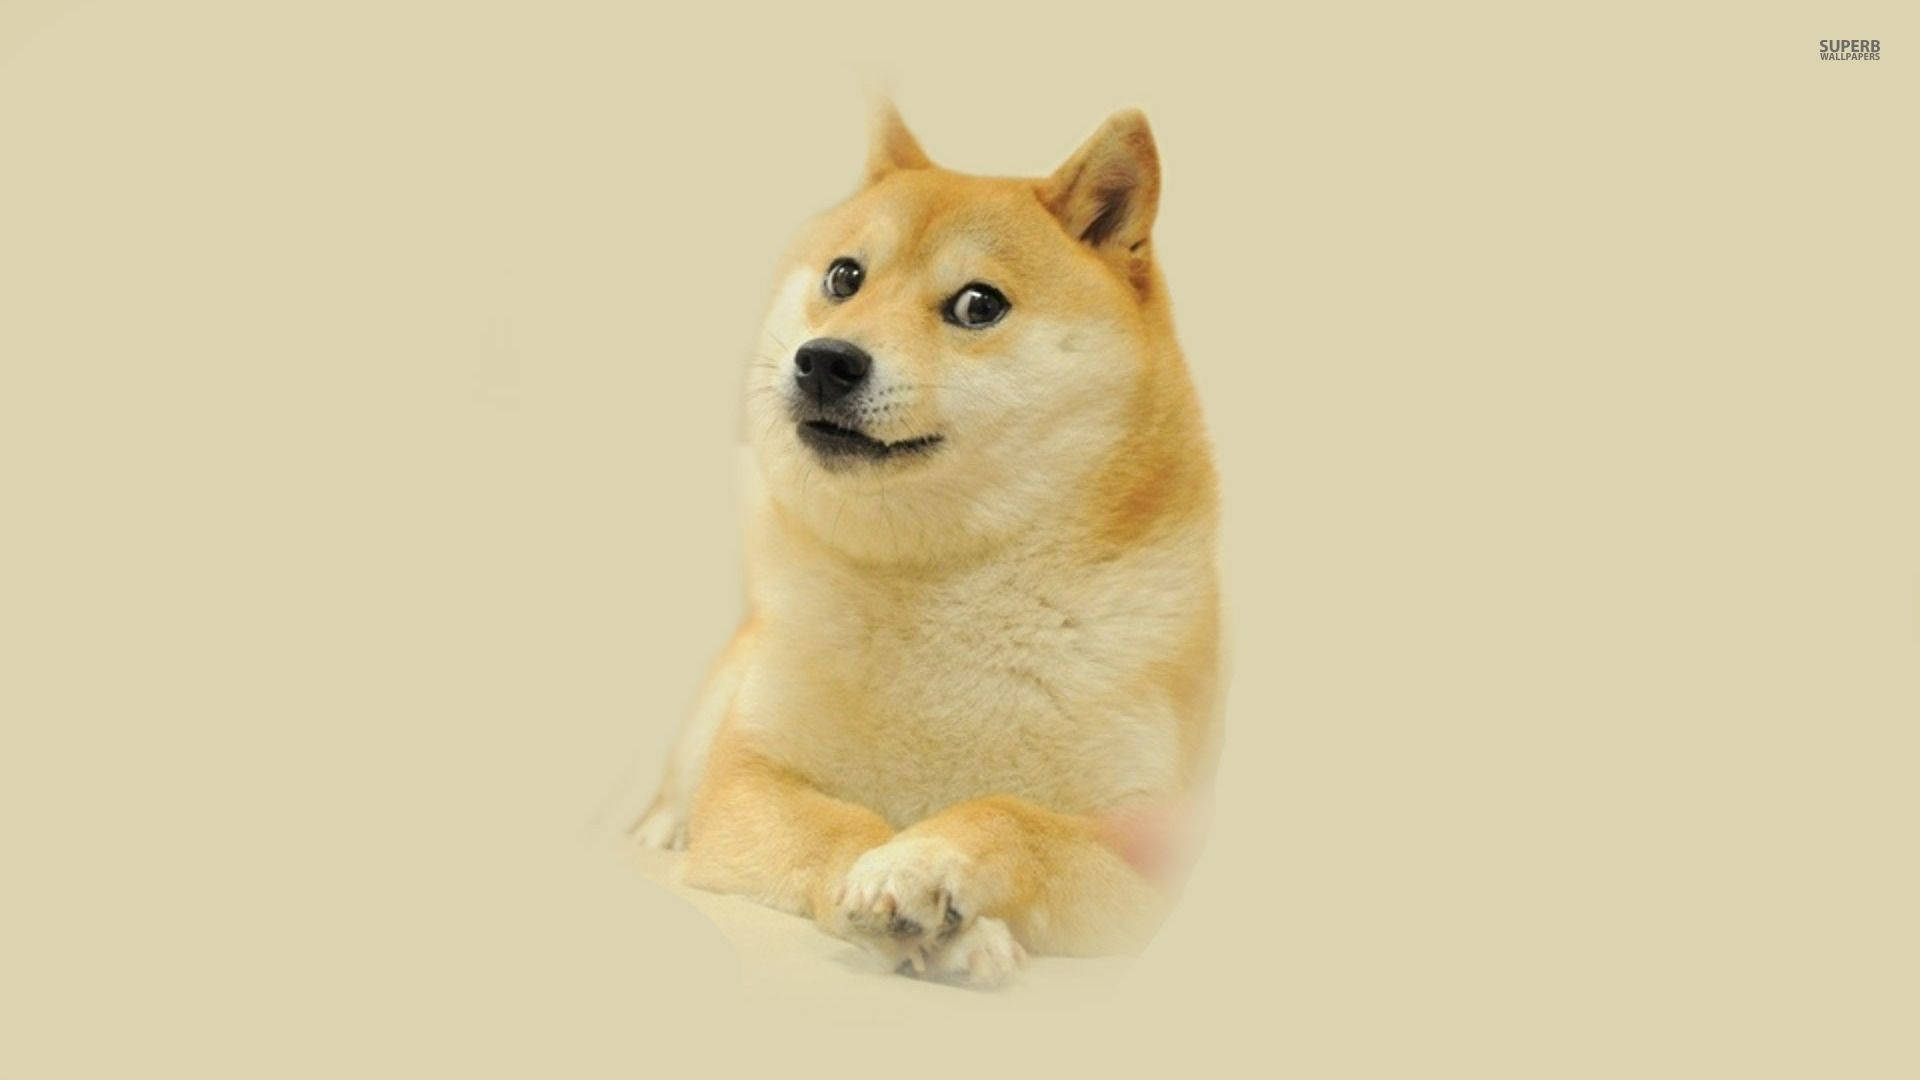 Doge Shiba Inu meme with serious happy face in a minimalist background.